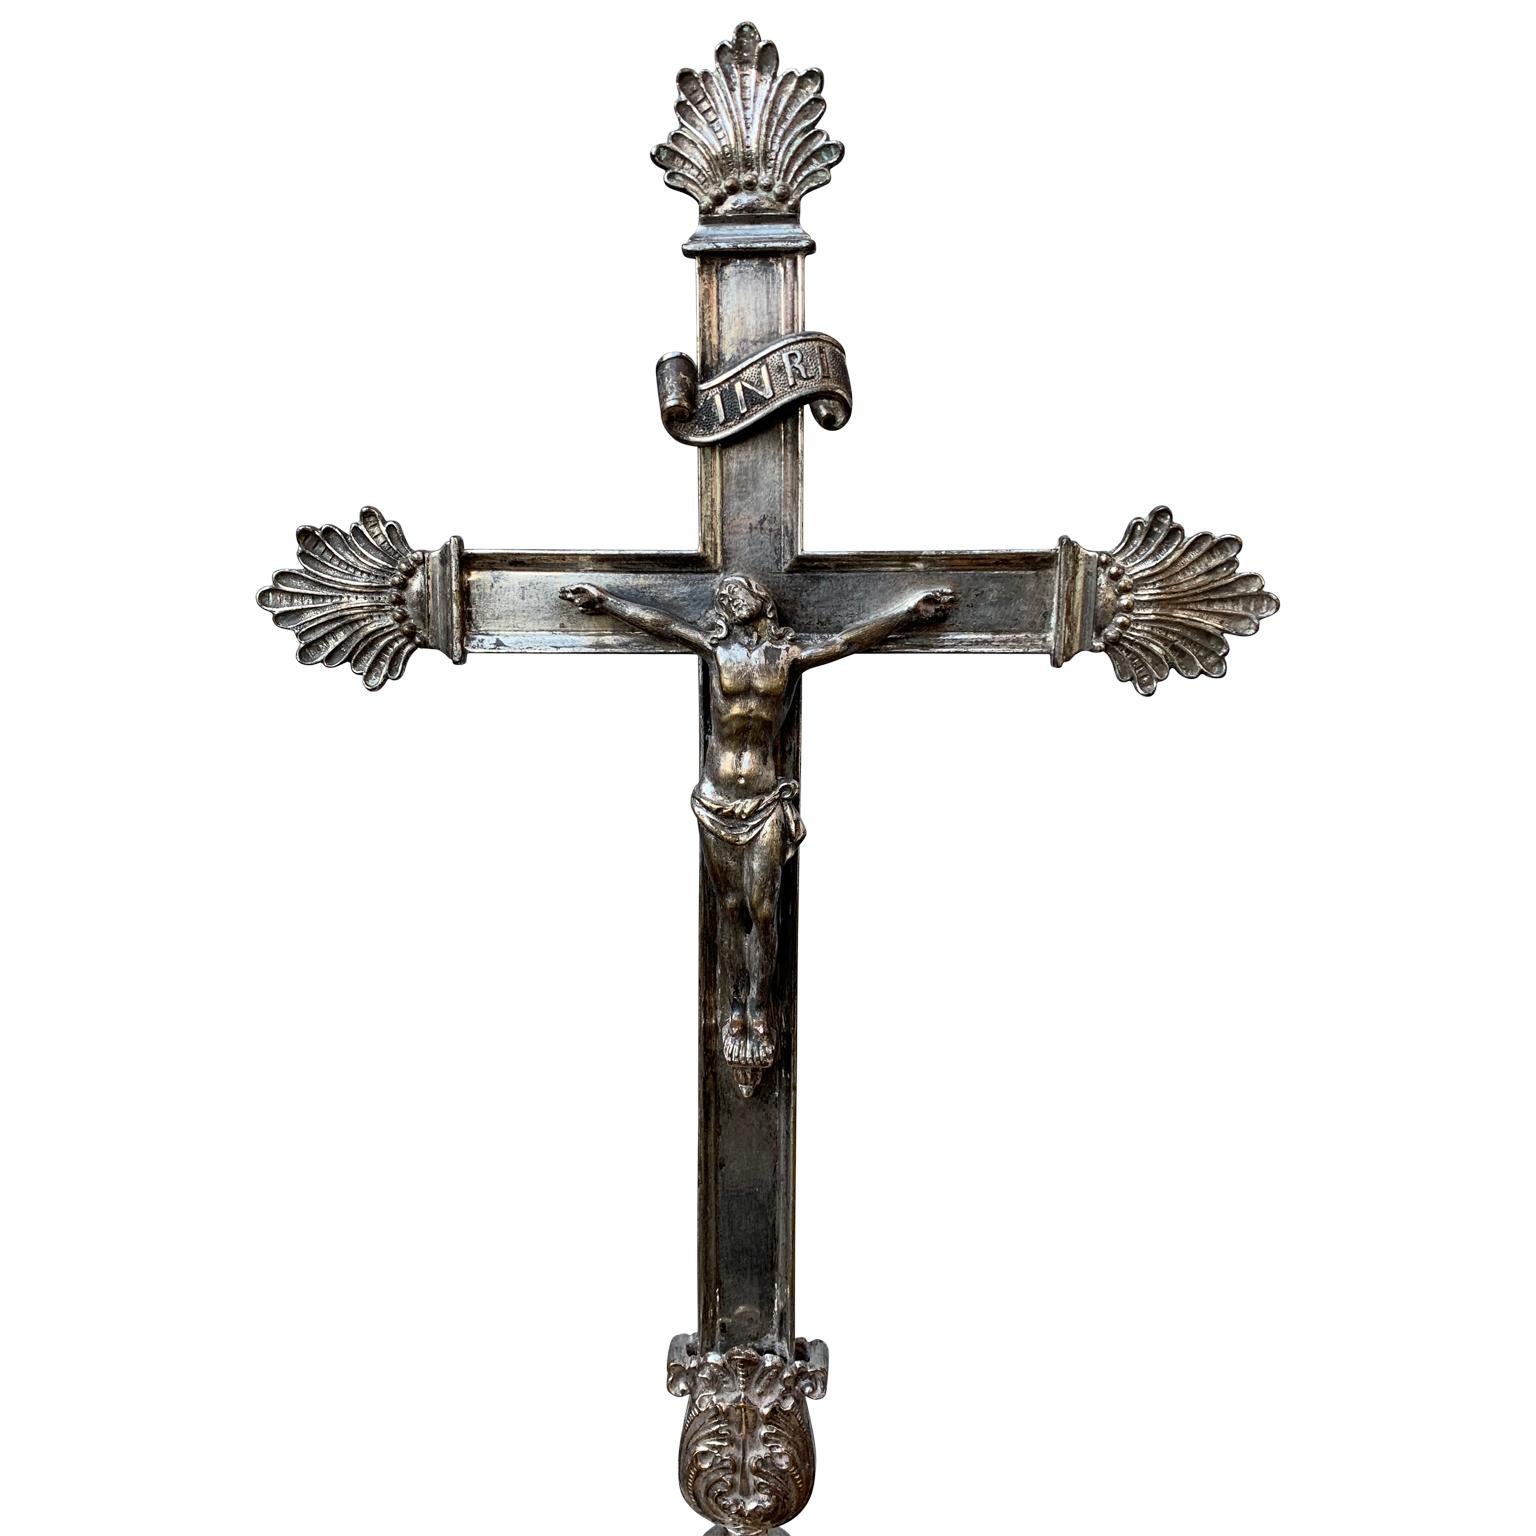 Napoleon III French 19th Century Altar Silvered Alter Crucifix